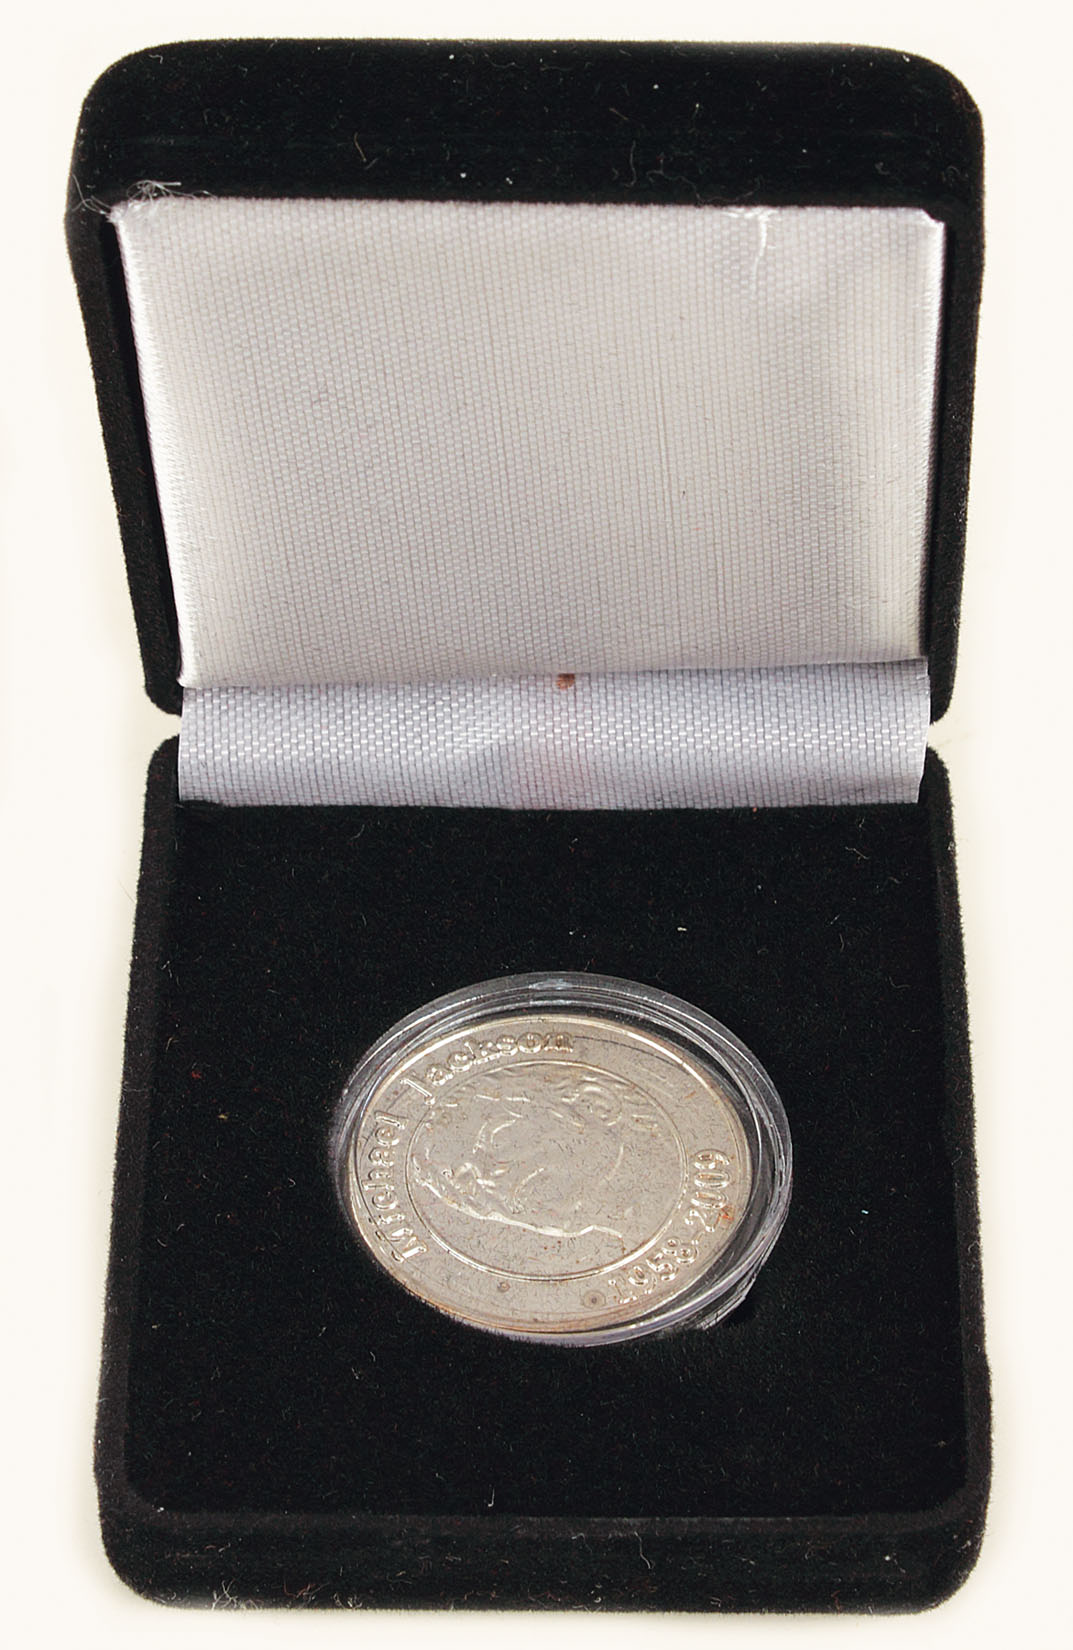 Silver Plated Michael Jackson Commemorative Coin gift HM 